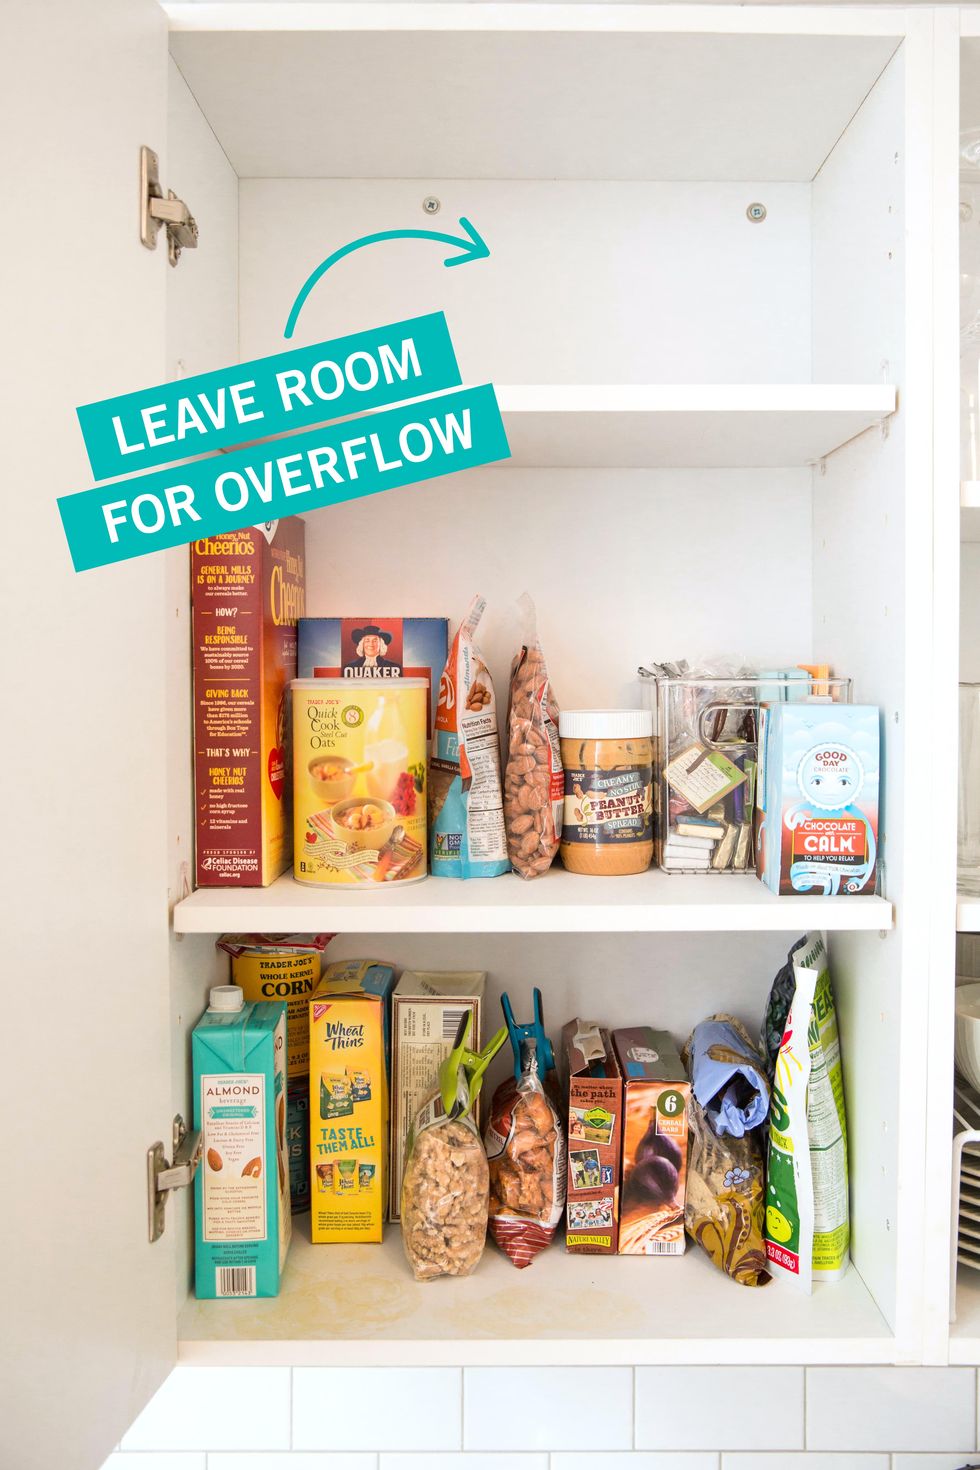 How a Pro Organizer Helped Me Organize My Kitchen Cabinet